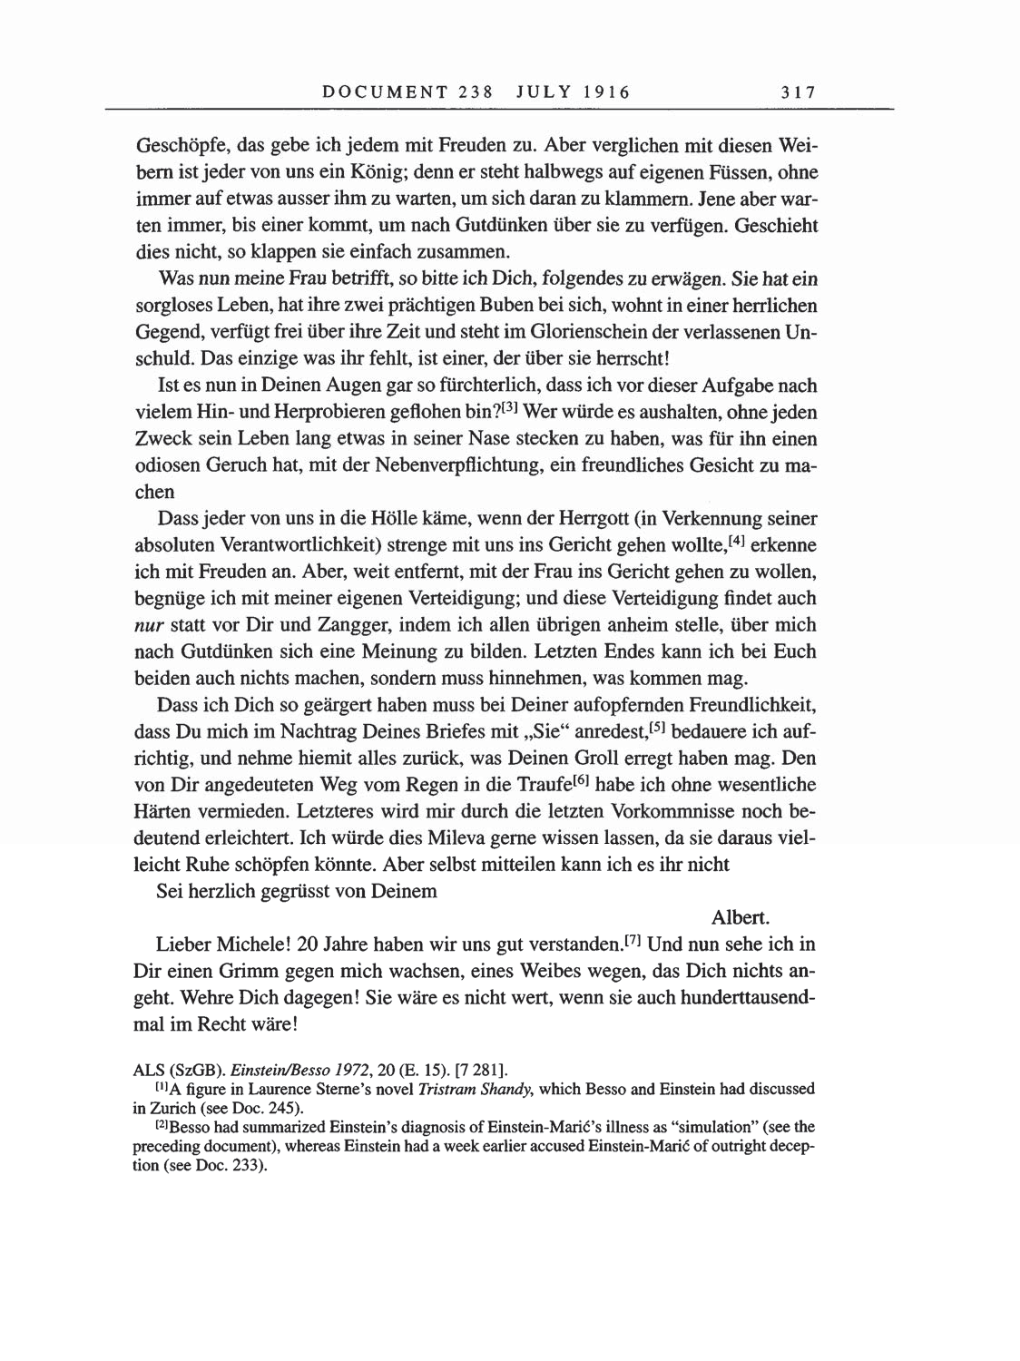 Volume 8, Part A: The Berlin Years: Correspondence 1914-1917 page 317